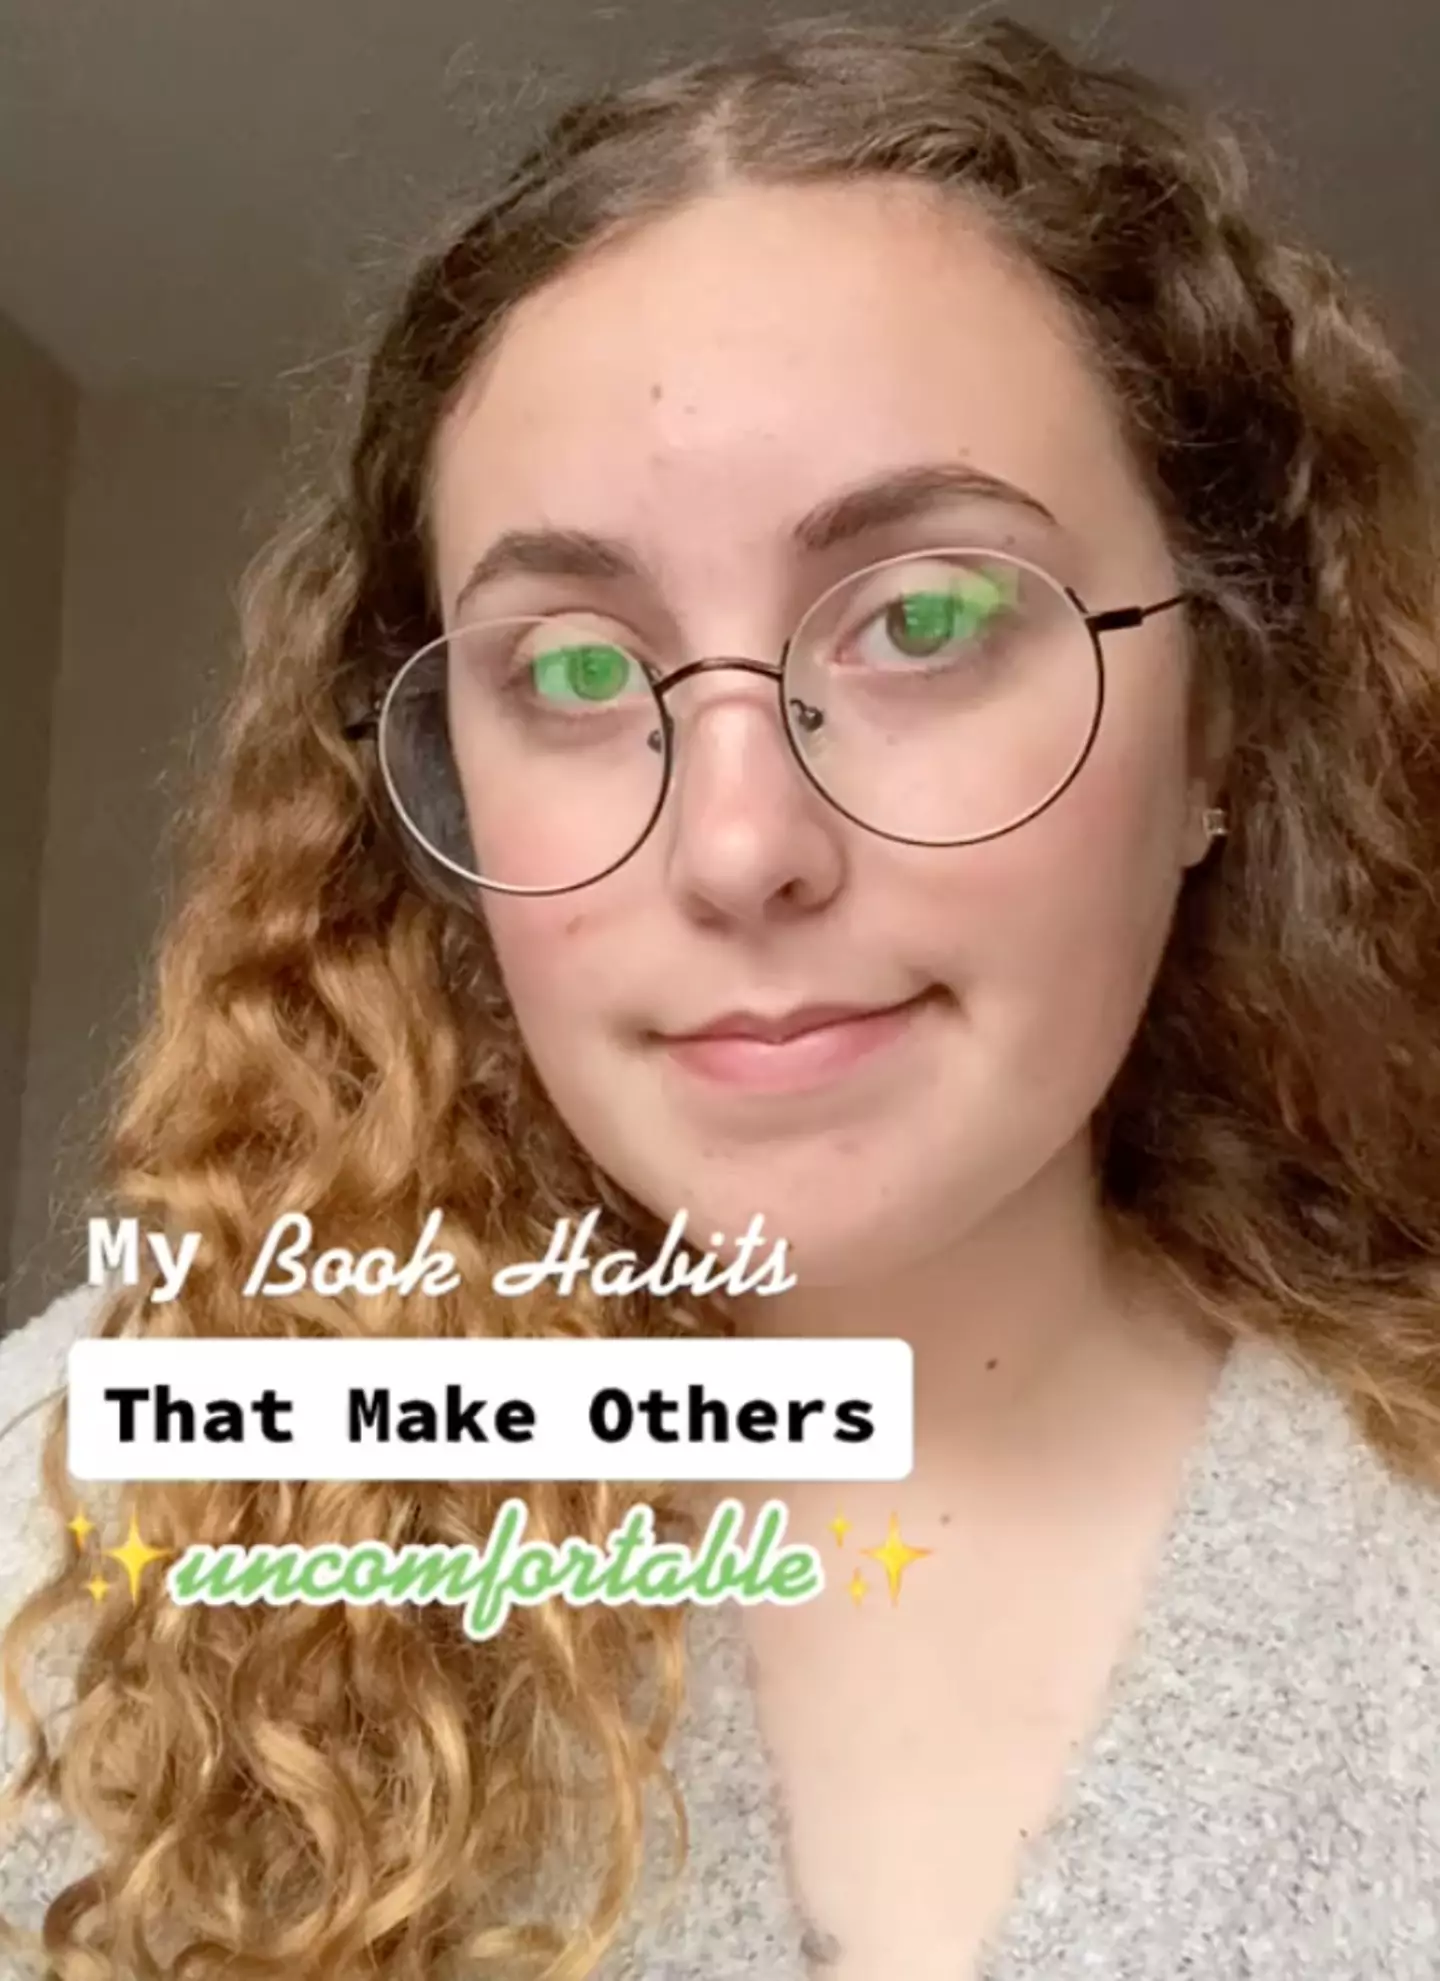 The bookworm took to TikTok to share her book habits that make people 'uncomfortable'.